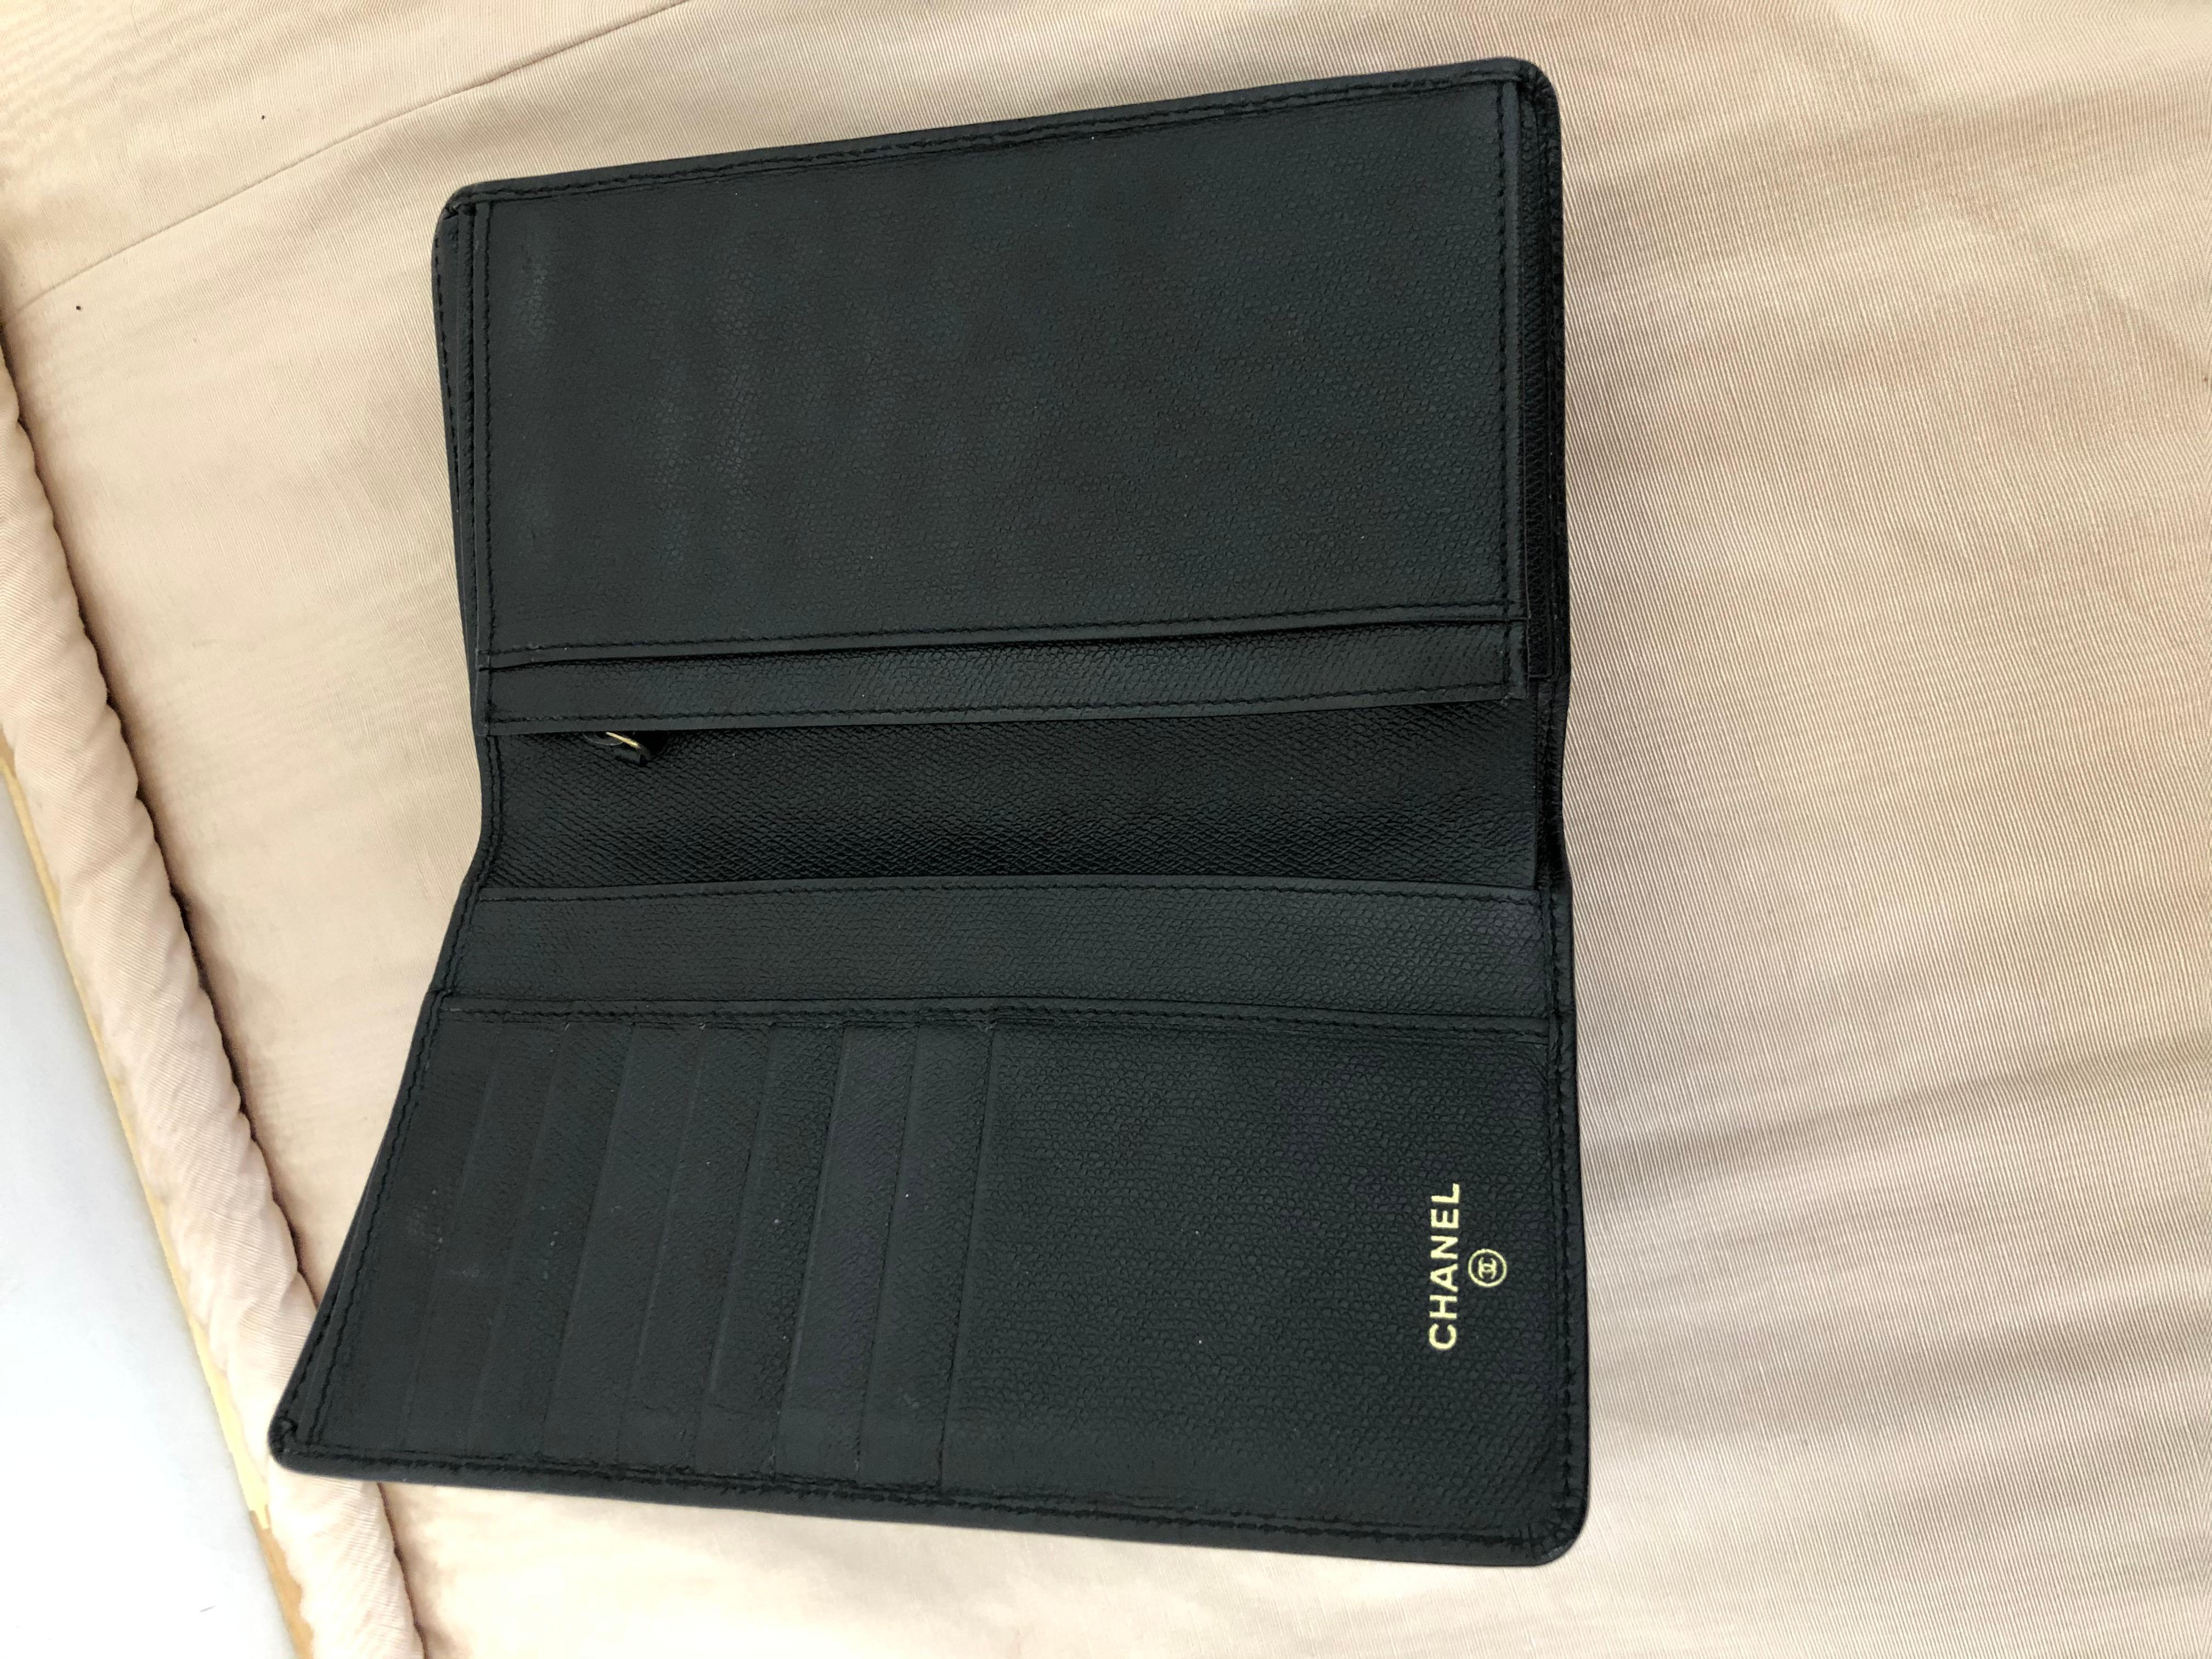 Very nice and practical wallet made of caviar/pebbled leather with 8 credit card slots; a deep back slot; 3 bill slots and a zipped compartment. The serial # is 9828708 (2004-2005), and is in excellent condition.